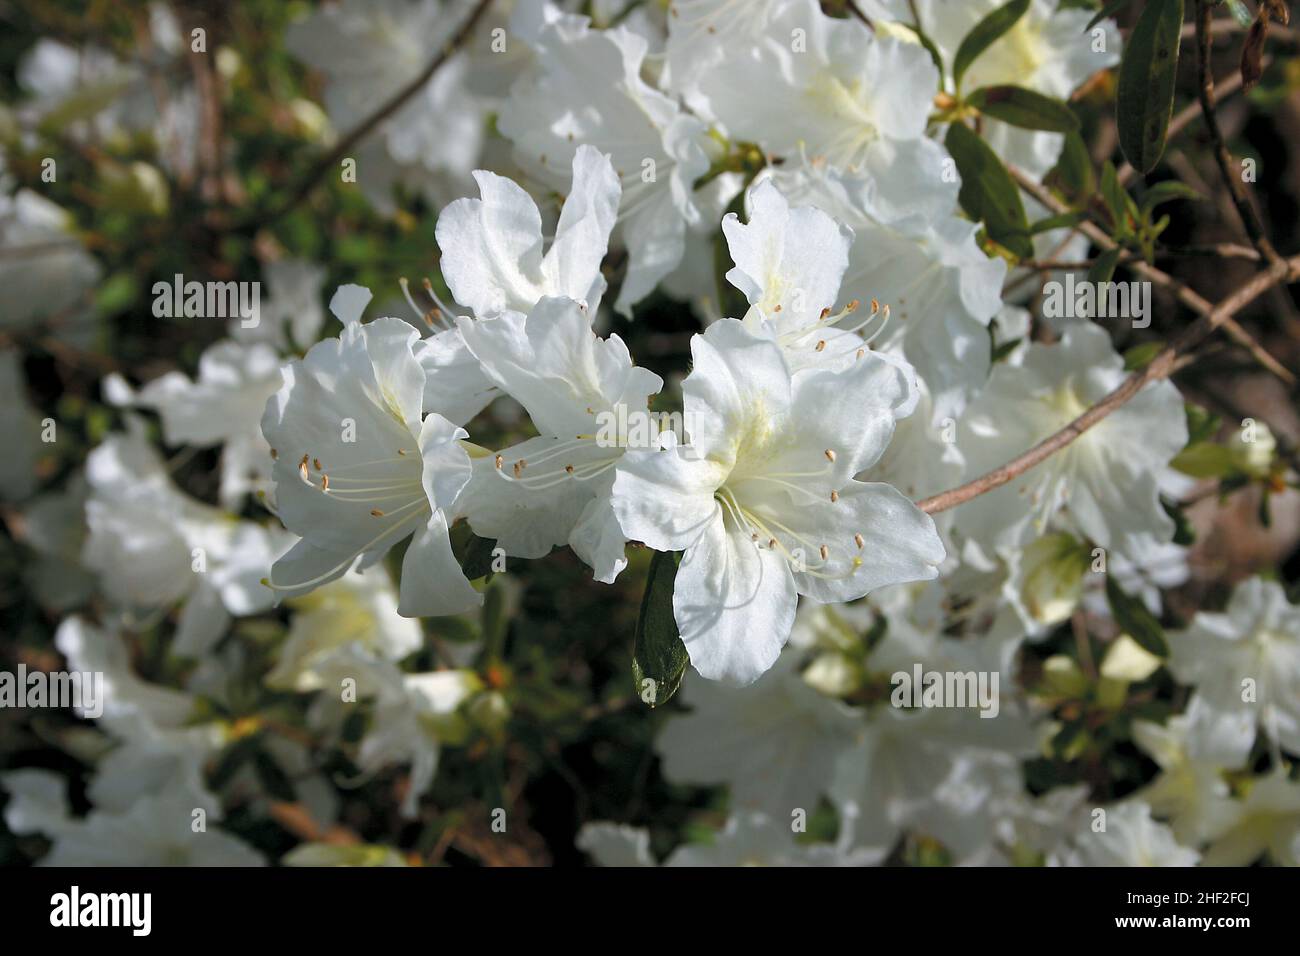 Close-up of delicate white azalea flowers in spring with open petals and protruding pistols and stamens Stock Photo